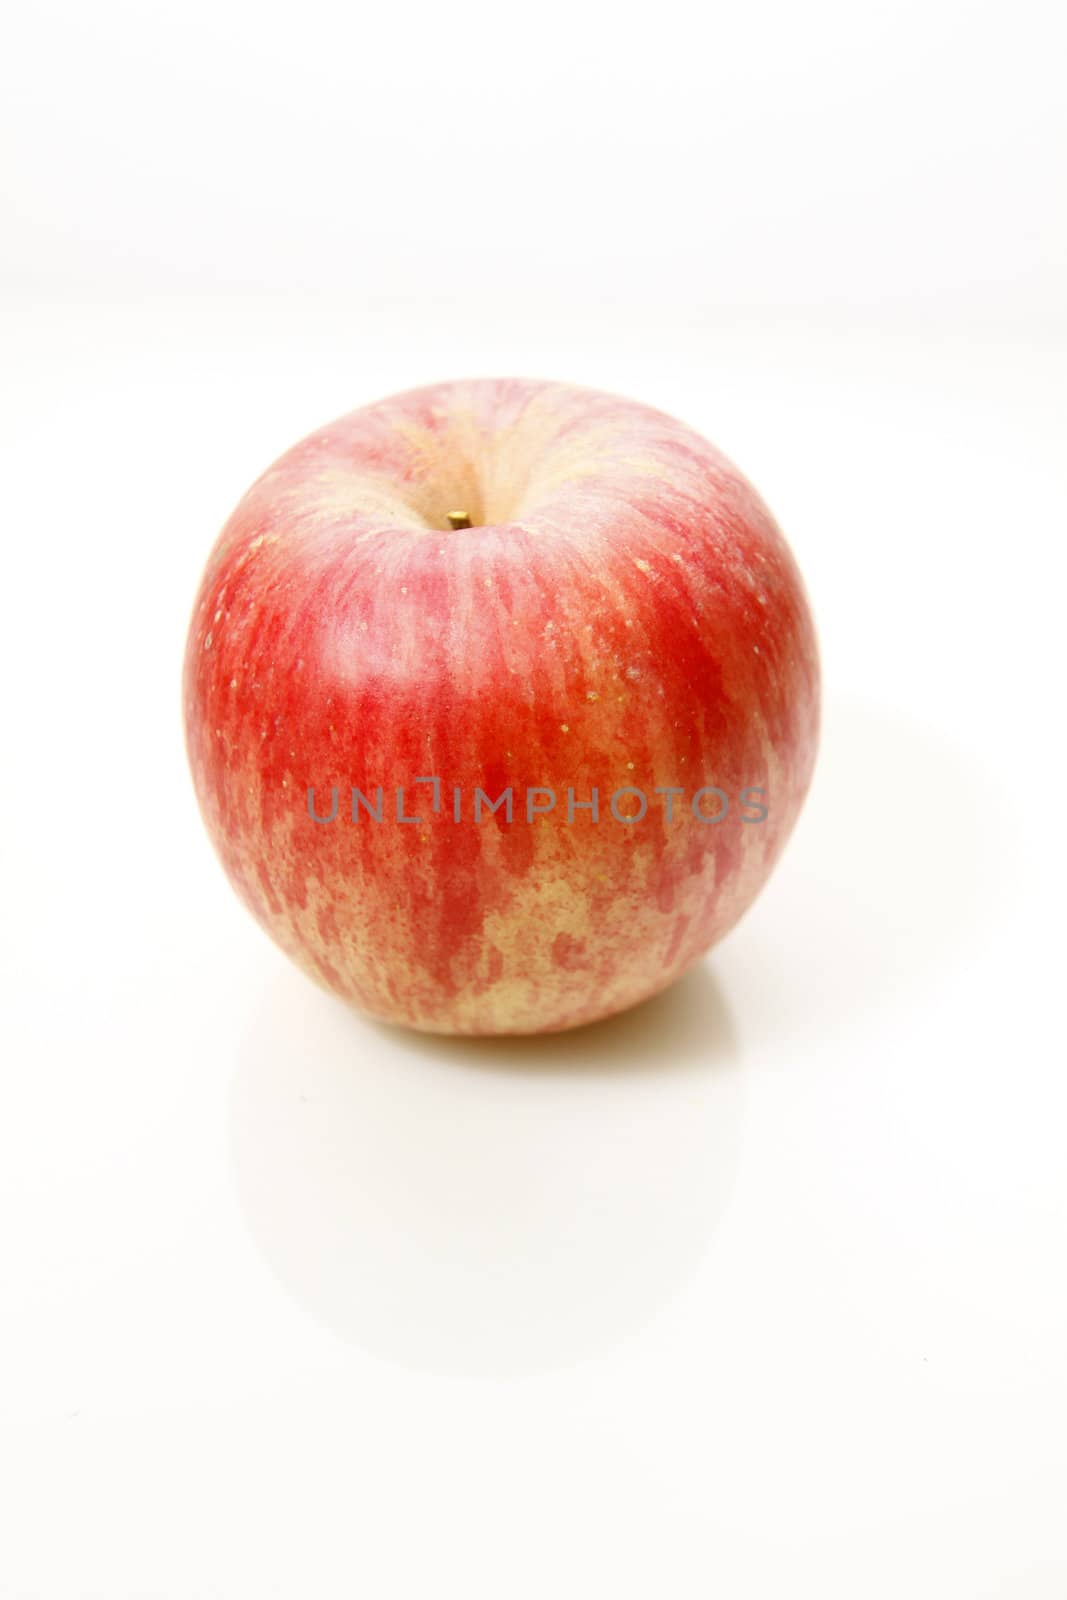 Red apple isolated on white background by kawing921